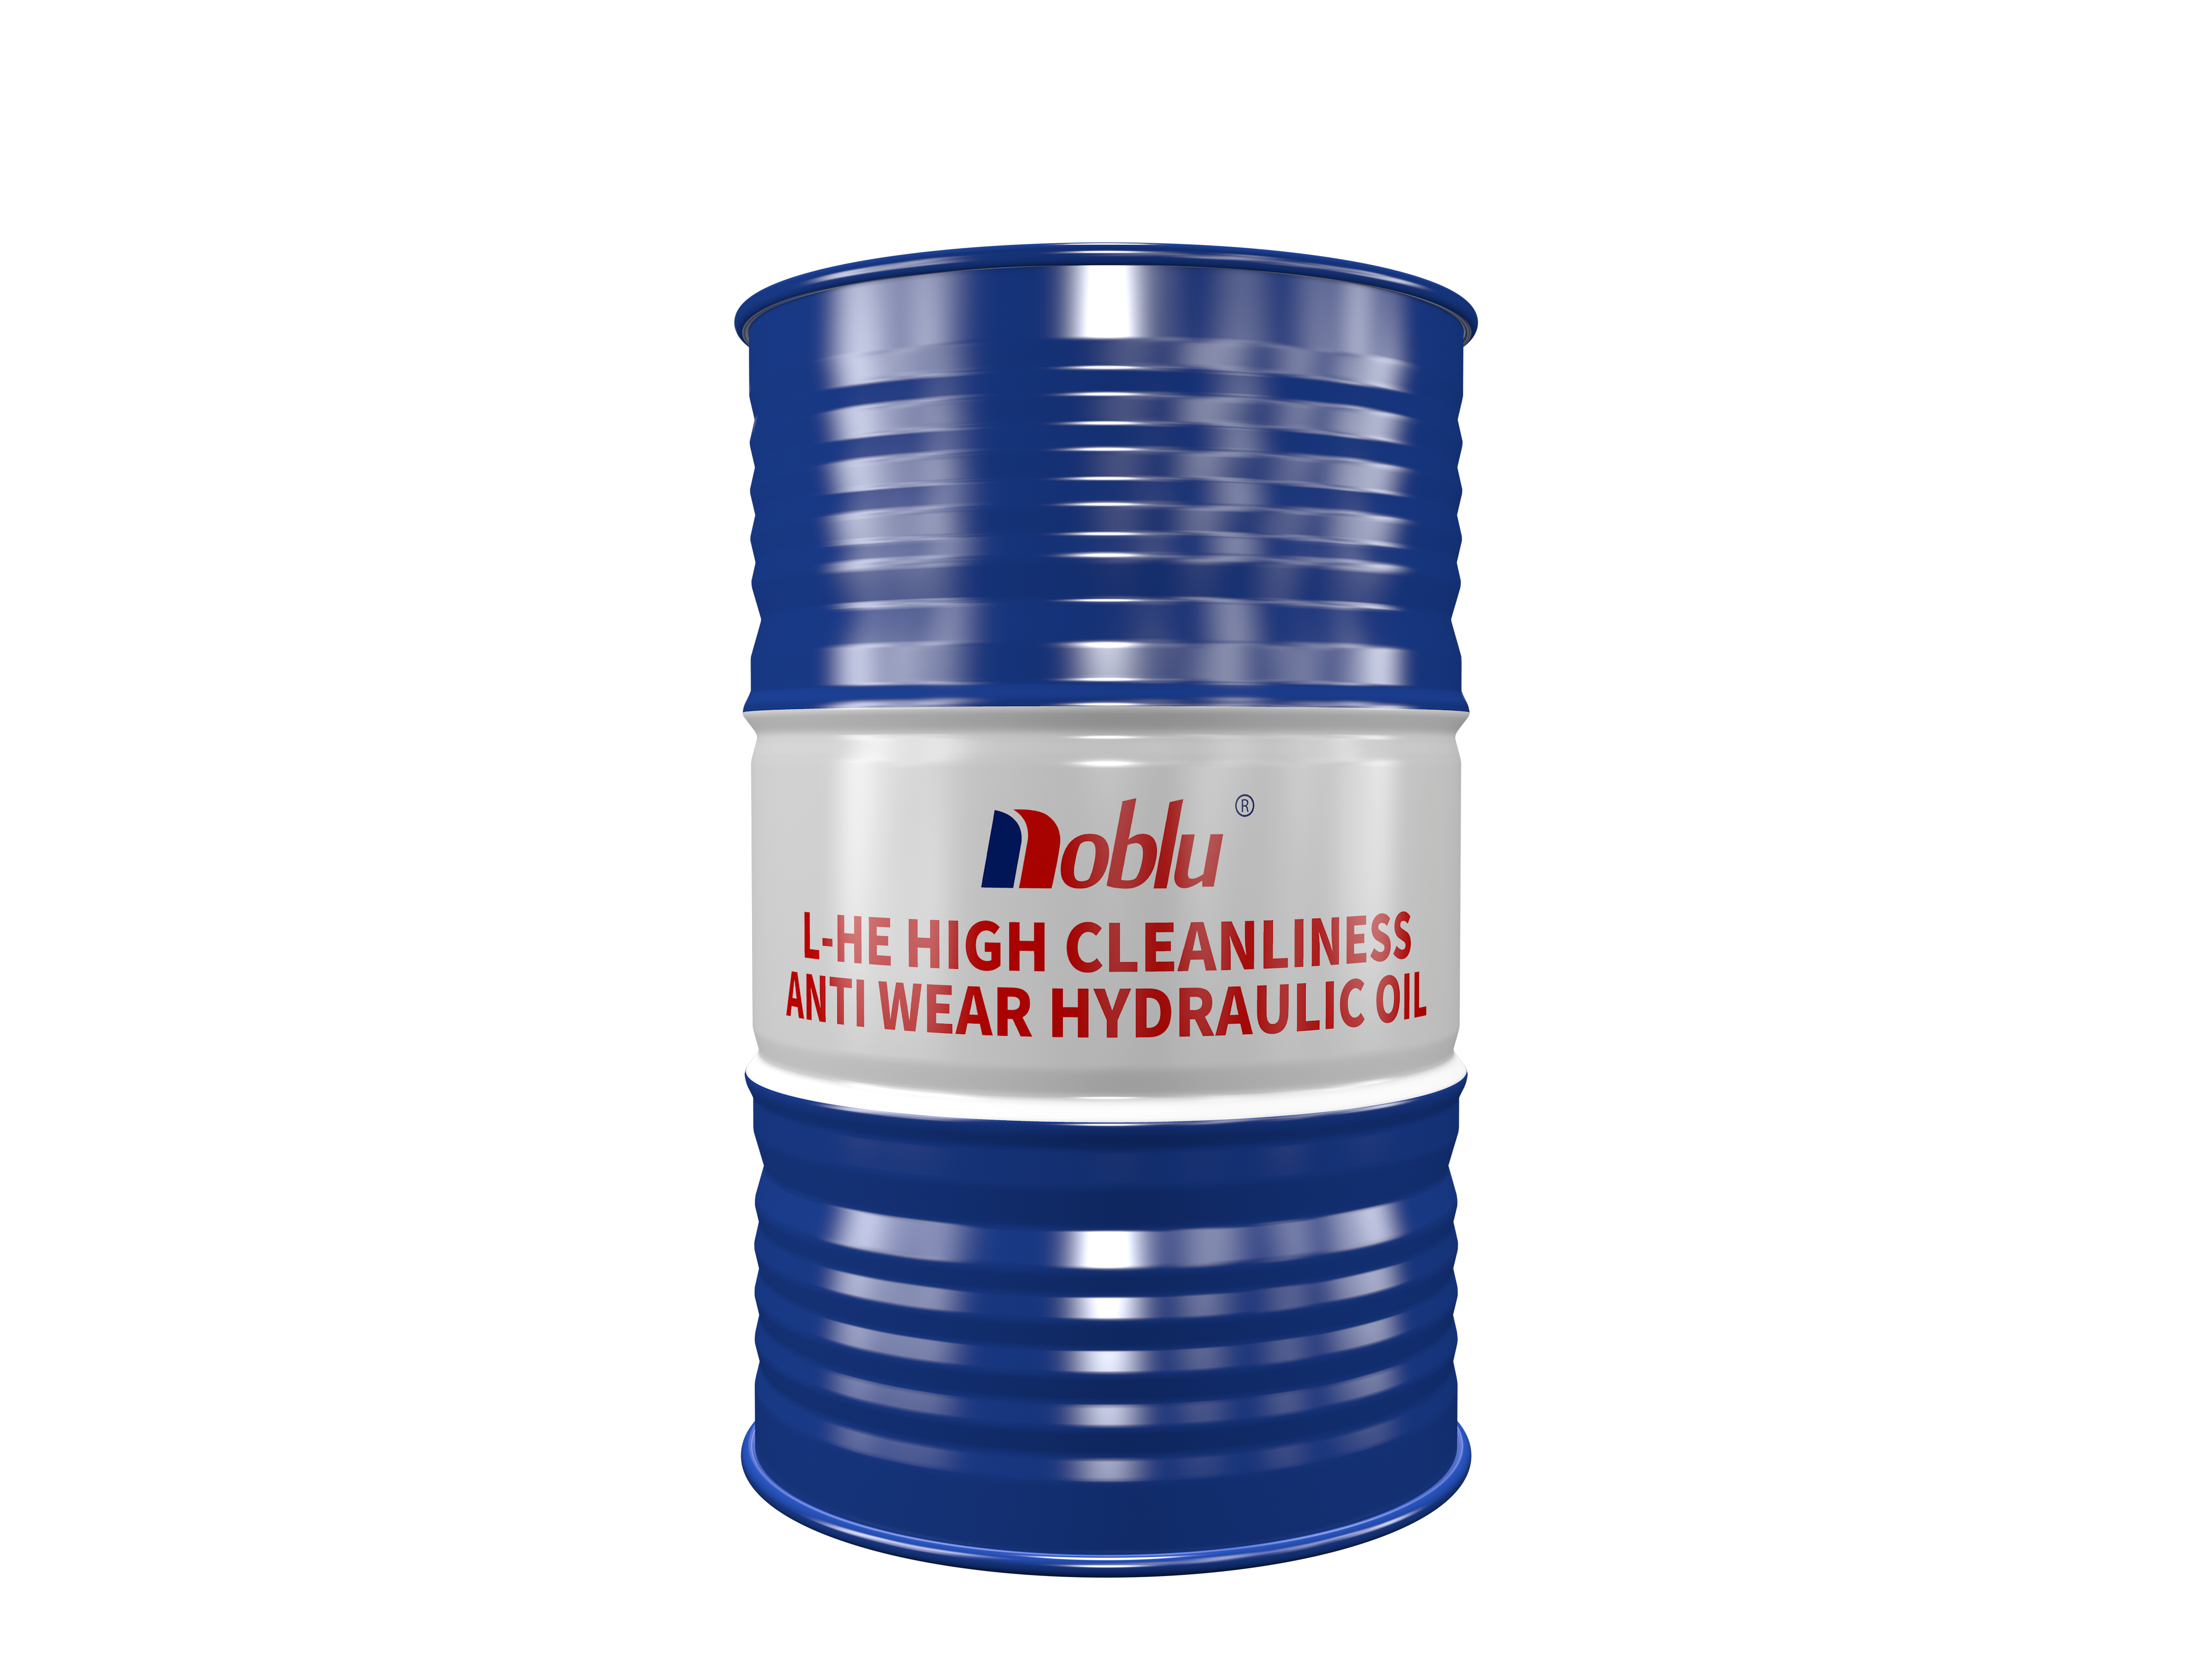 L-HE high cleanliness anti wear hydraulic oil